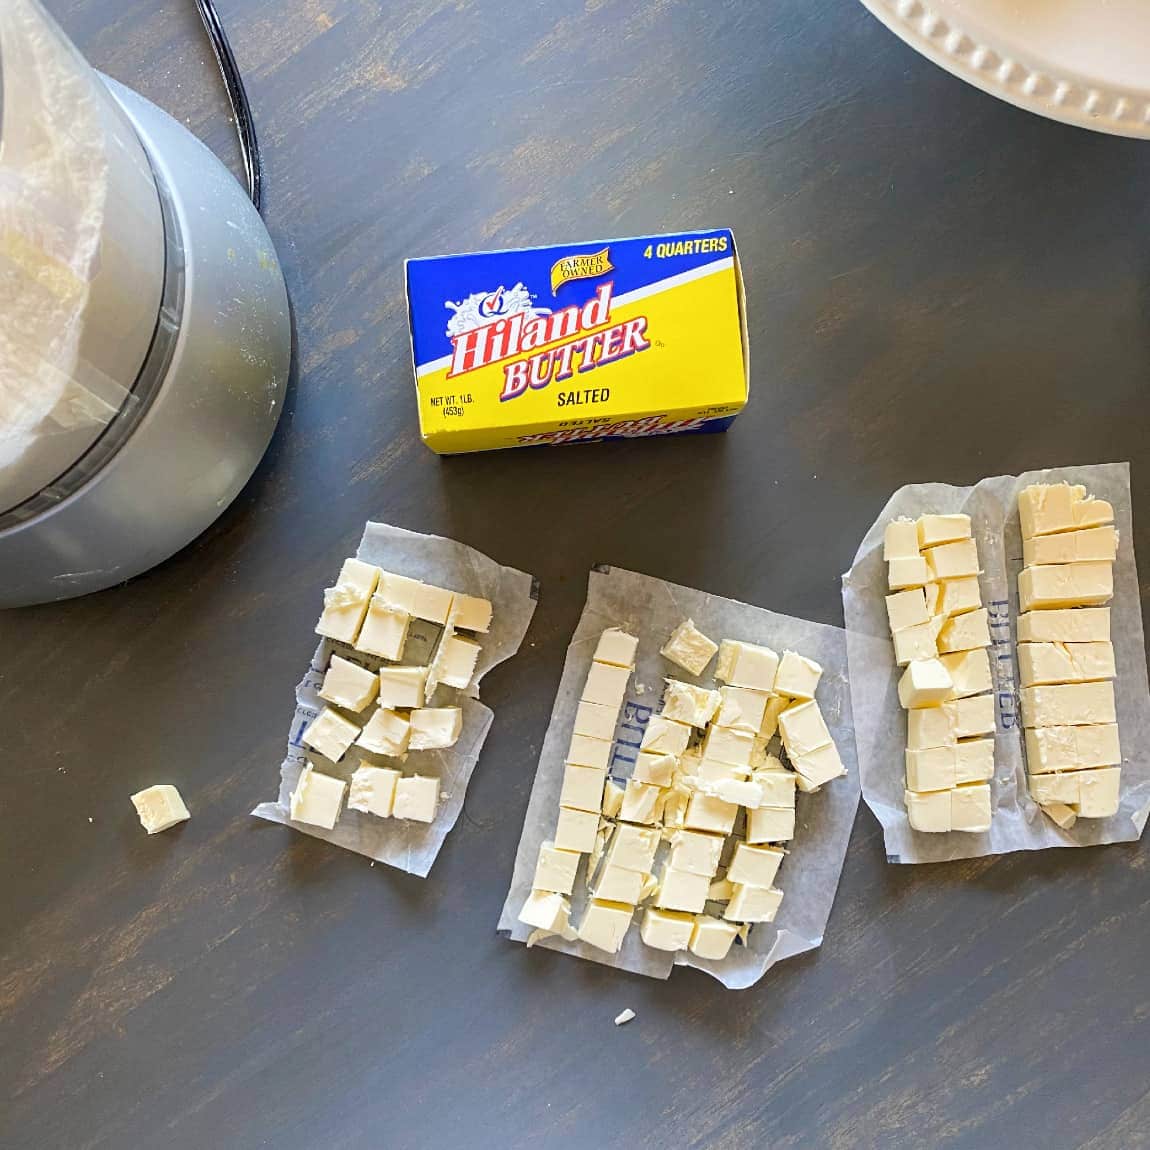 hiland dairy butter cubes used to make homemade puff pastry